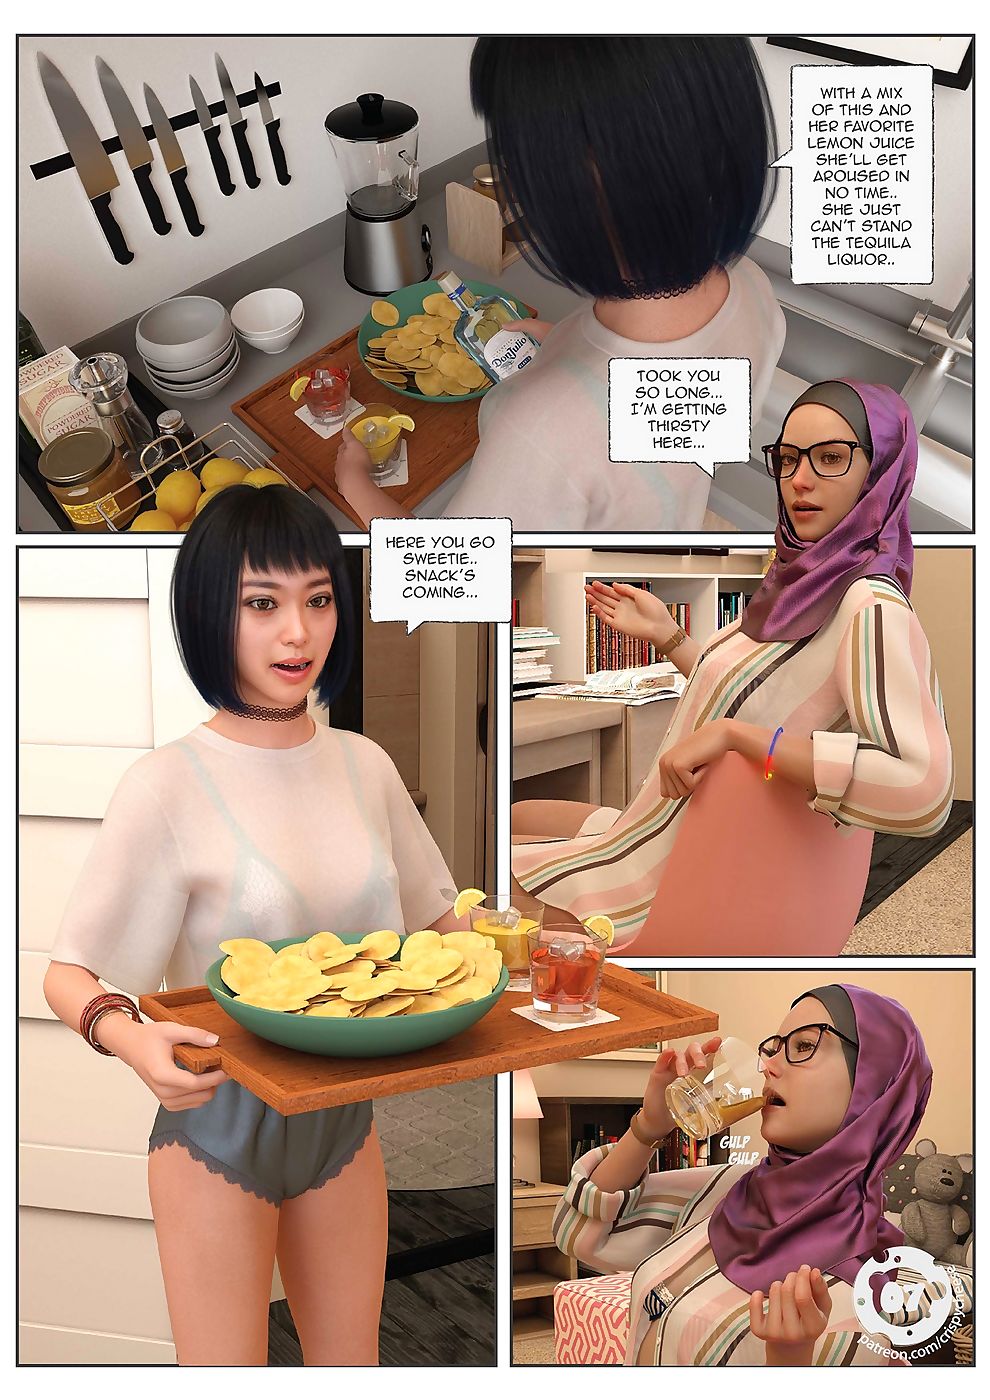 Crispycheese- Roommate page 1